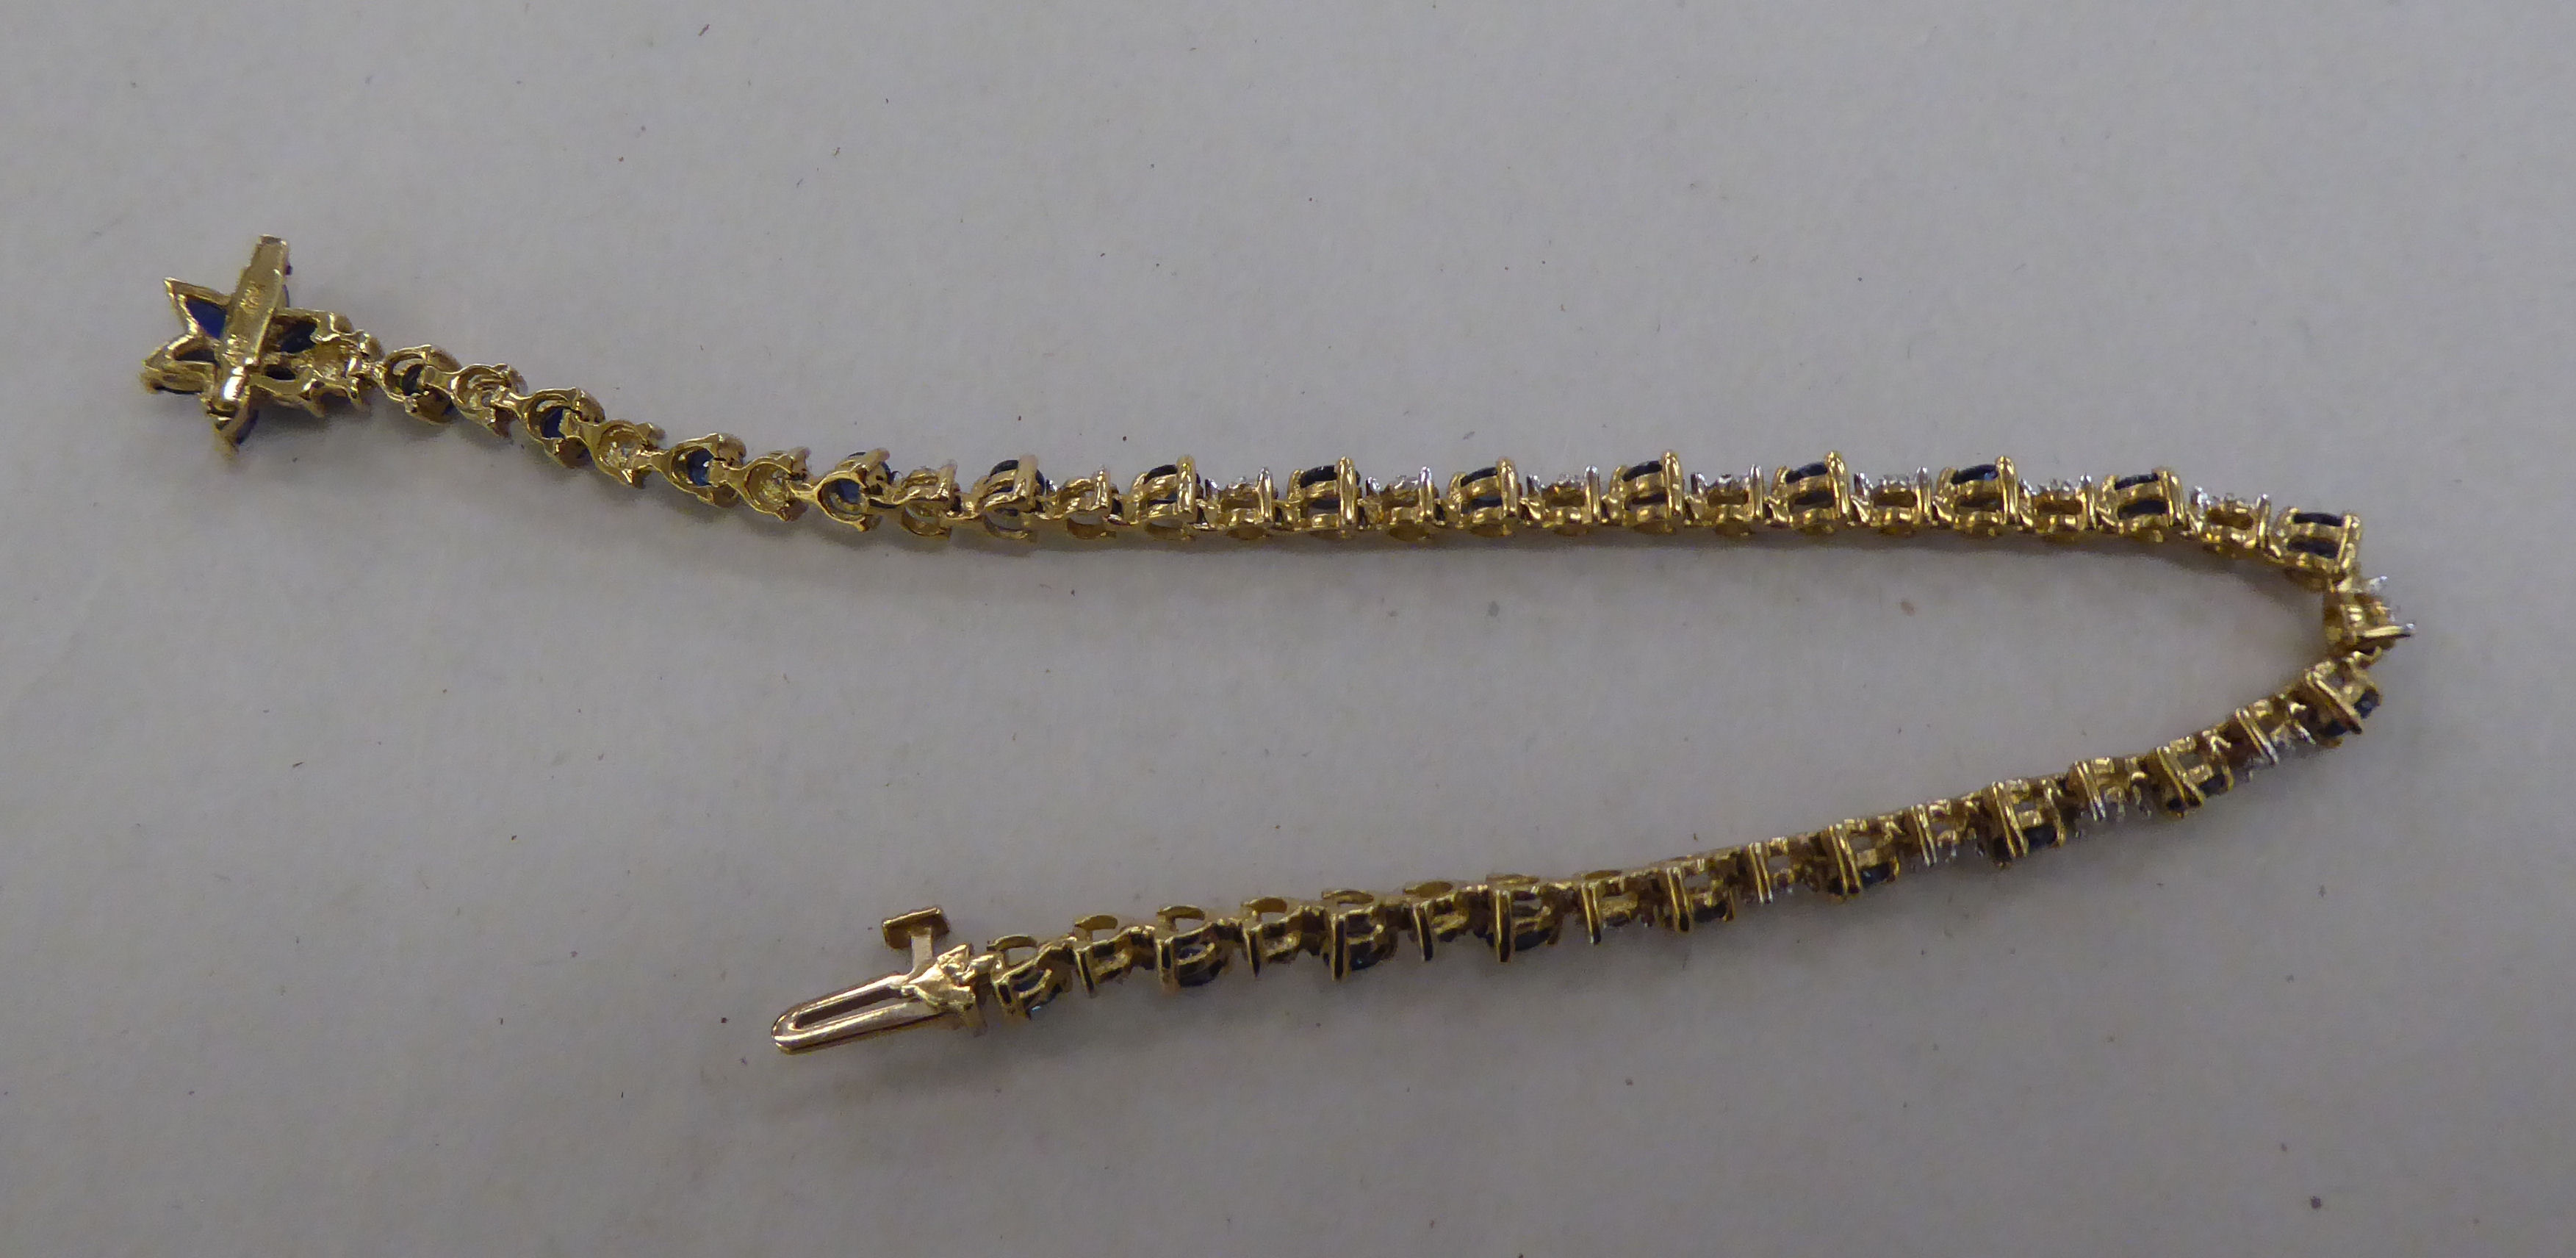 A 10k gold bracelet, set with sapphires and diamonds - Image 3 of 4